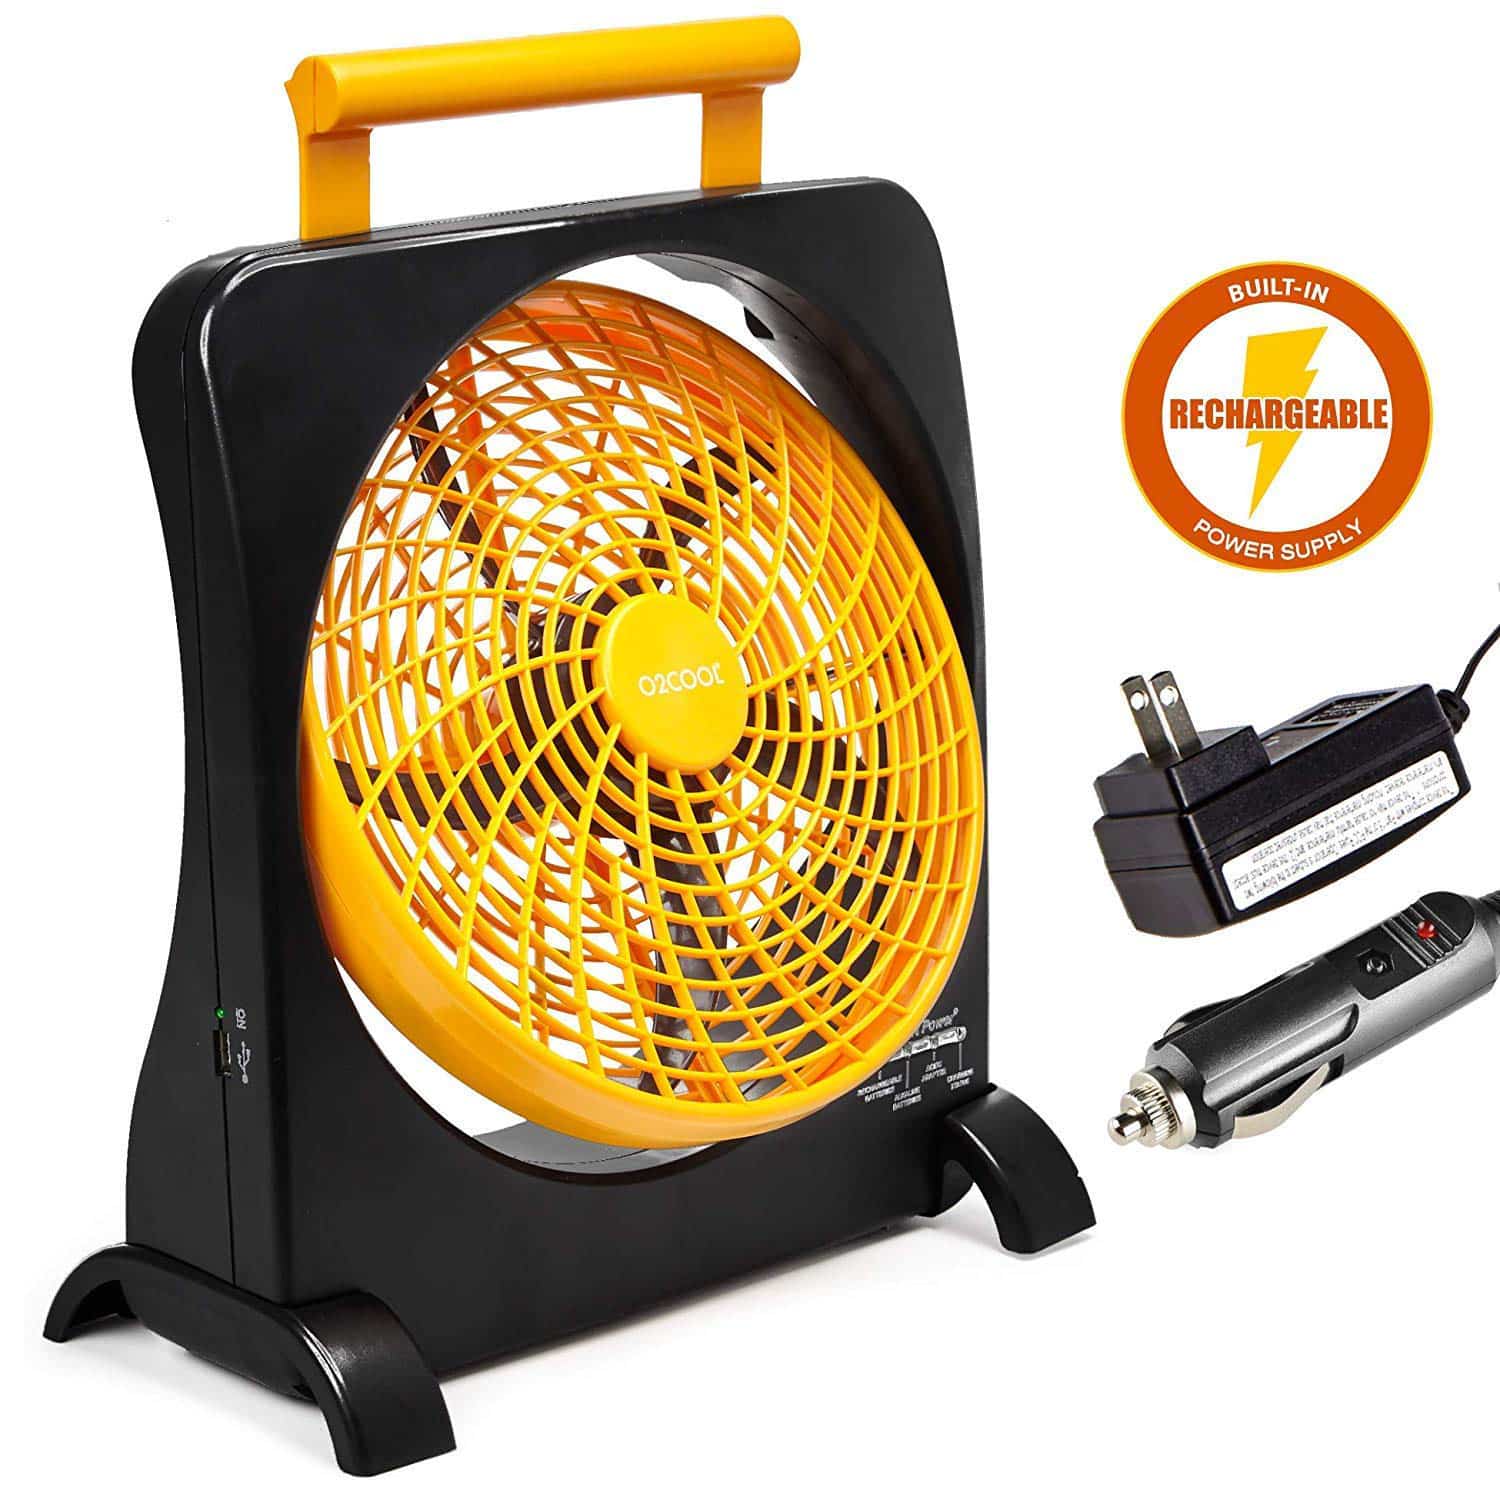 Top 10 Best Battery Operated Fans in 2020 | Best Personal Fan What Is The Best Battery Operated Fan